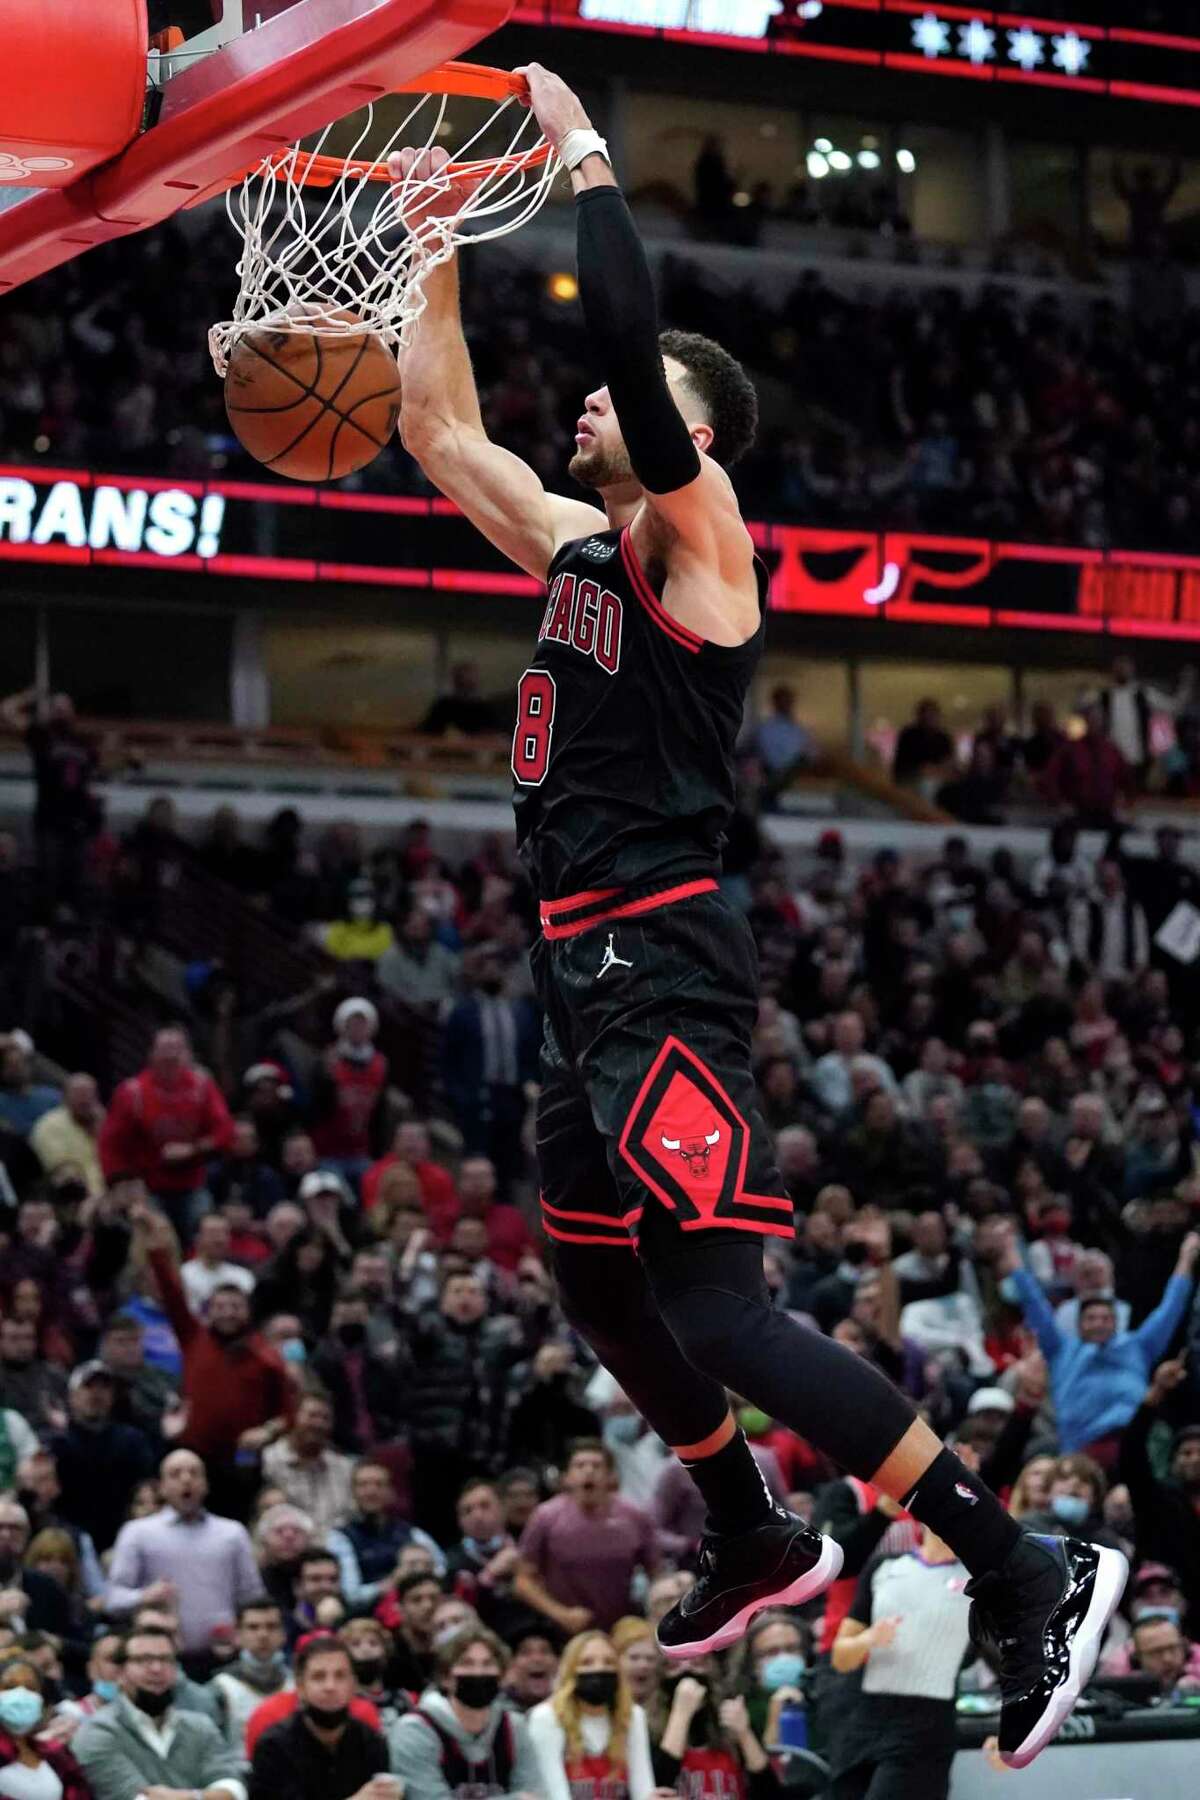 Zach LaVine, who’s averaging 25.9 points per game, leads the Bulls against the Warriors at 7 p.m. Friday at Chase Center (NBCSBA, ESPN/95.7).